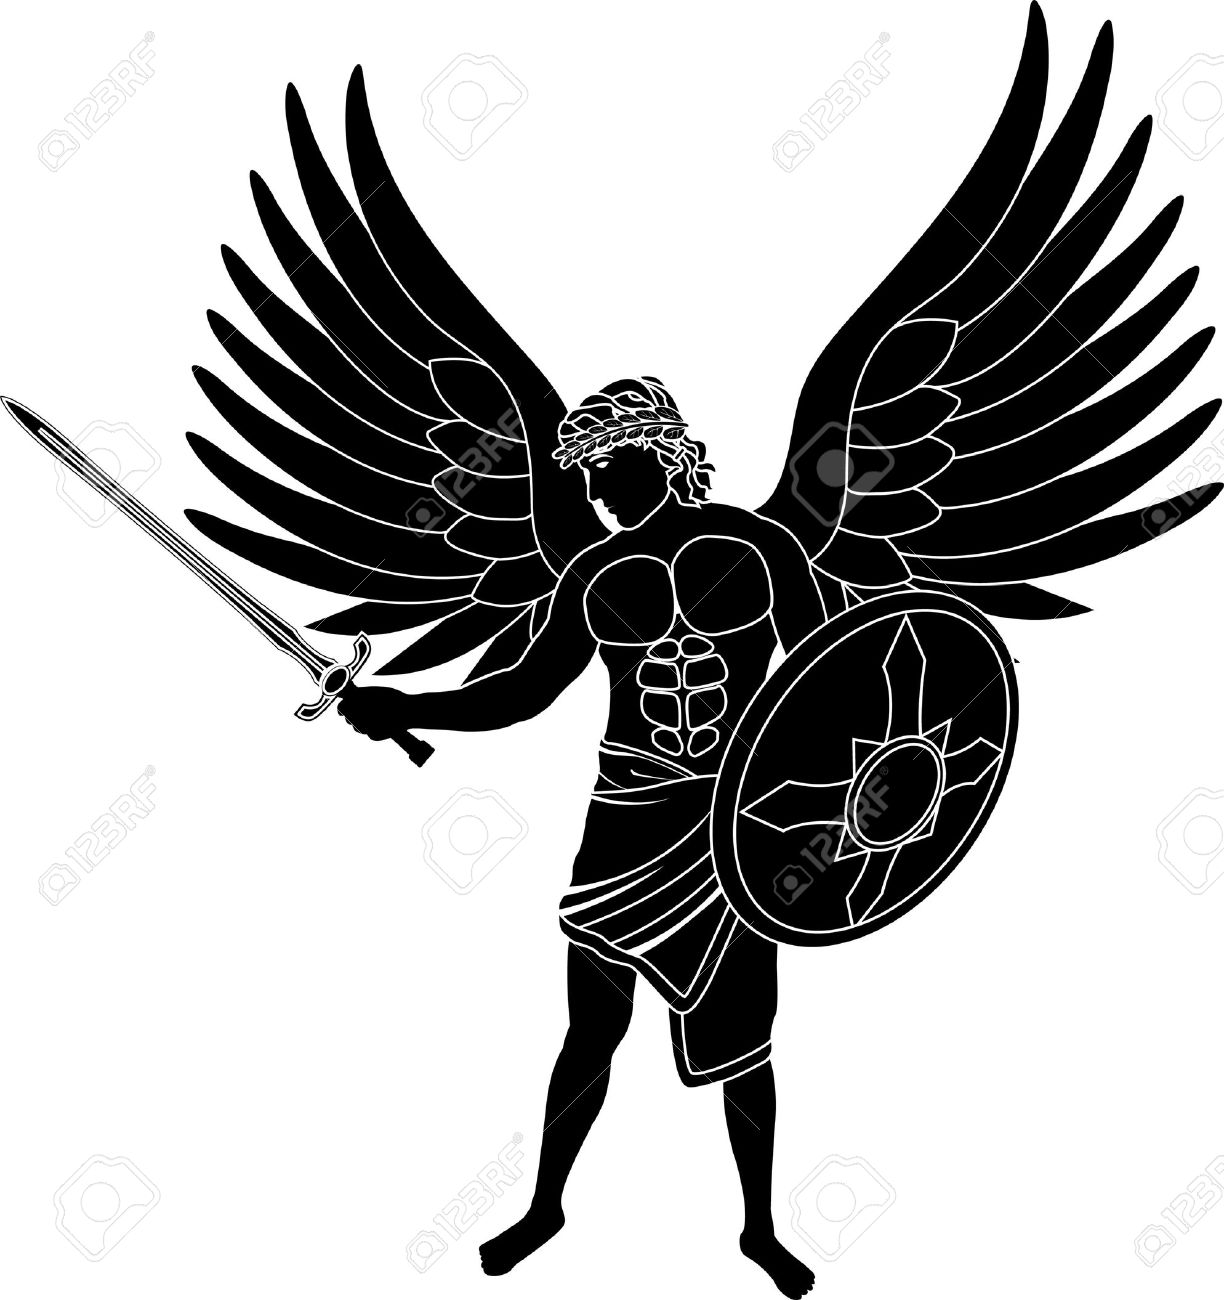 Angel Warrior clipart #11, Download drawings